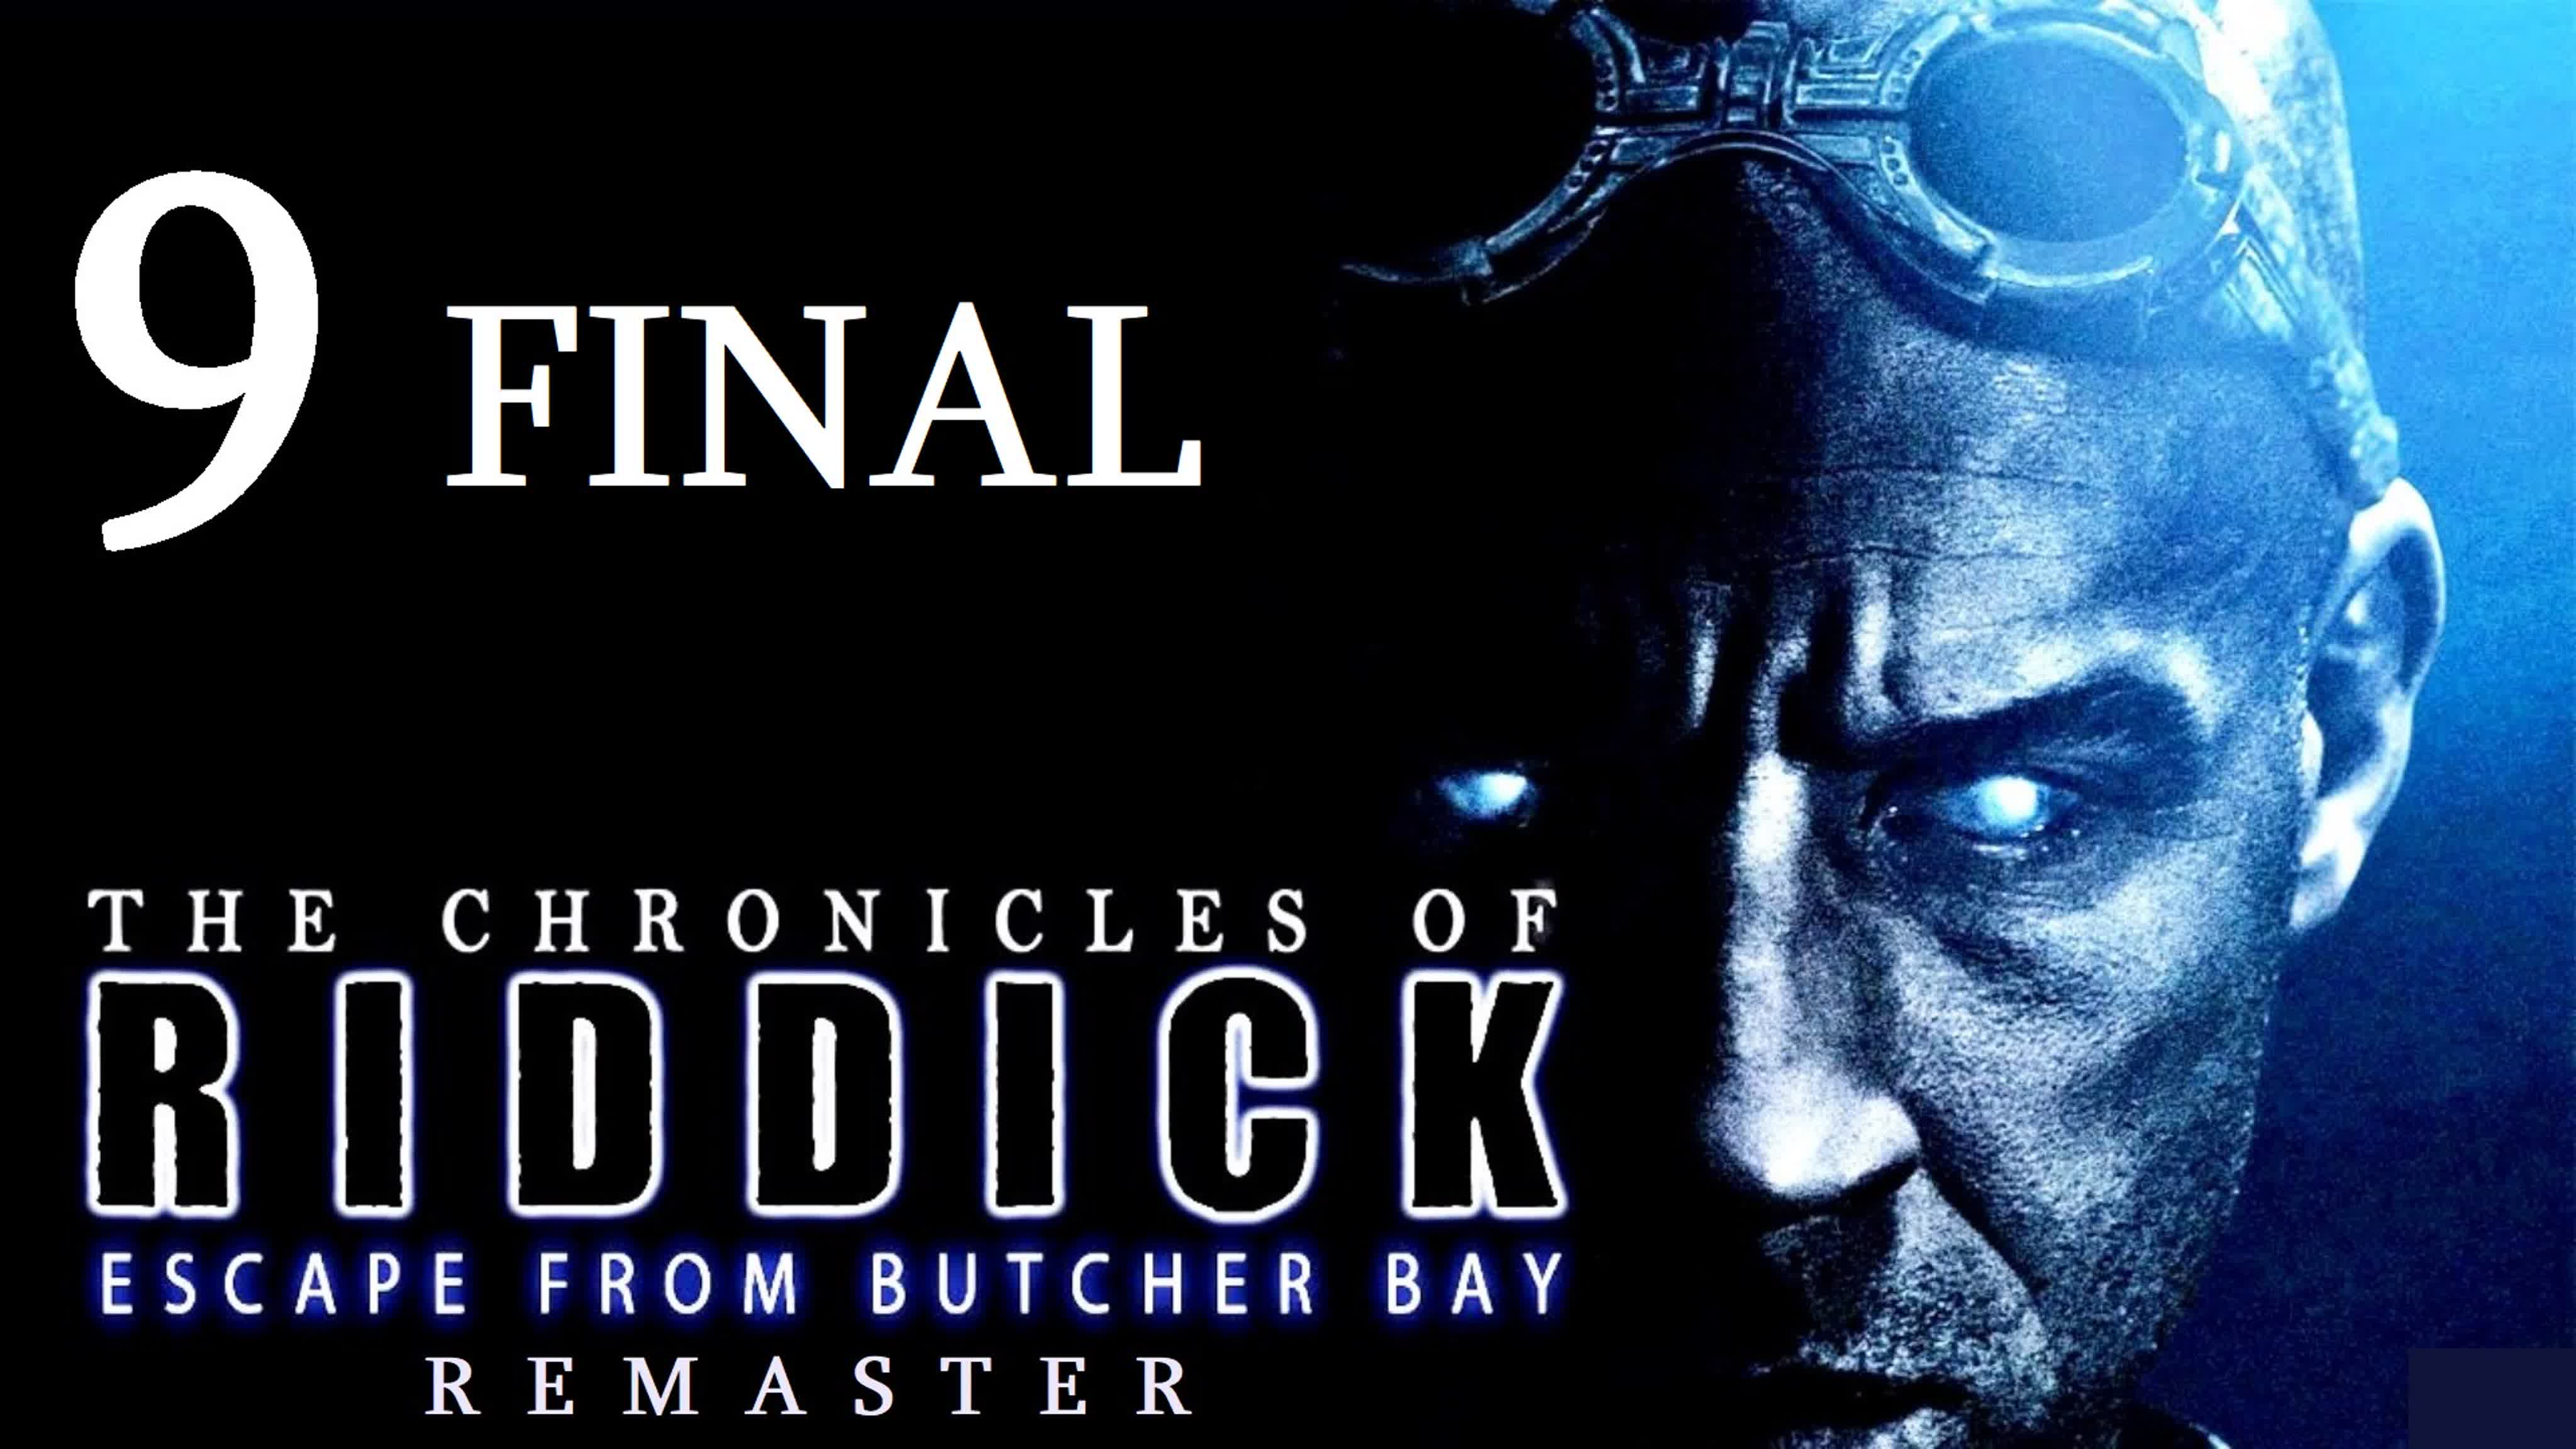 The Chronicles Of Riddick: Escape From Butcher Bay (Remaster 2009)